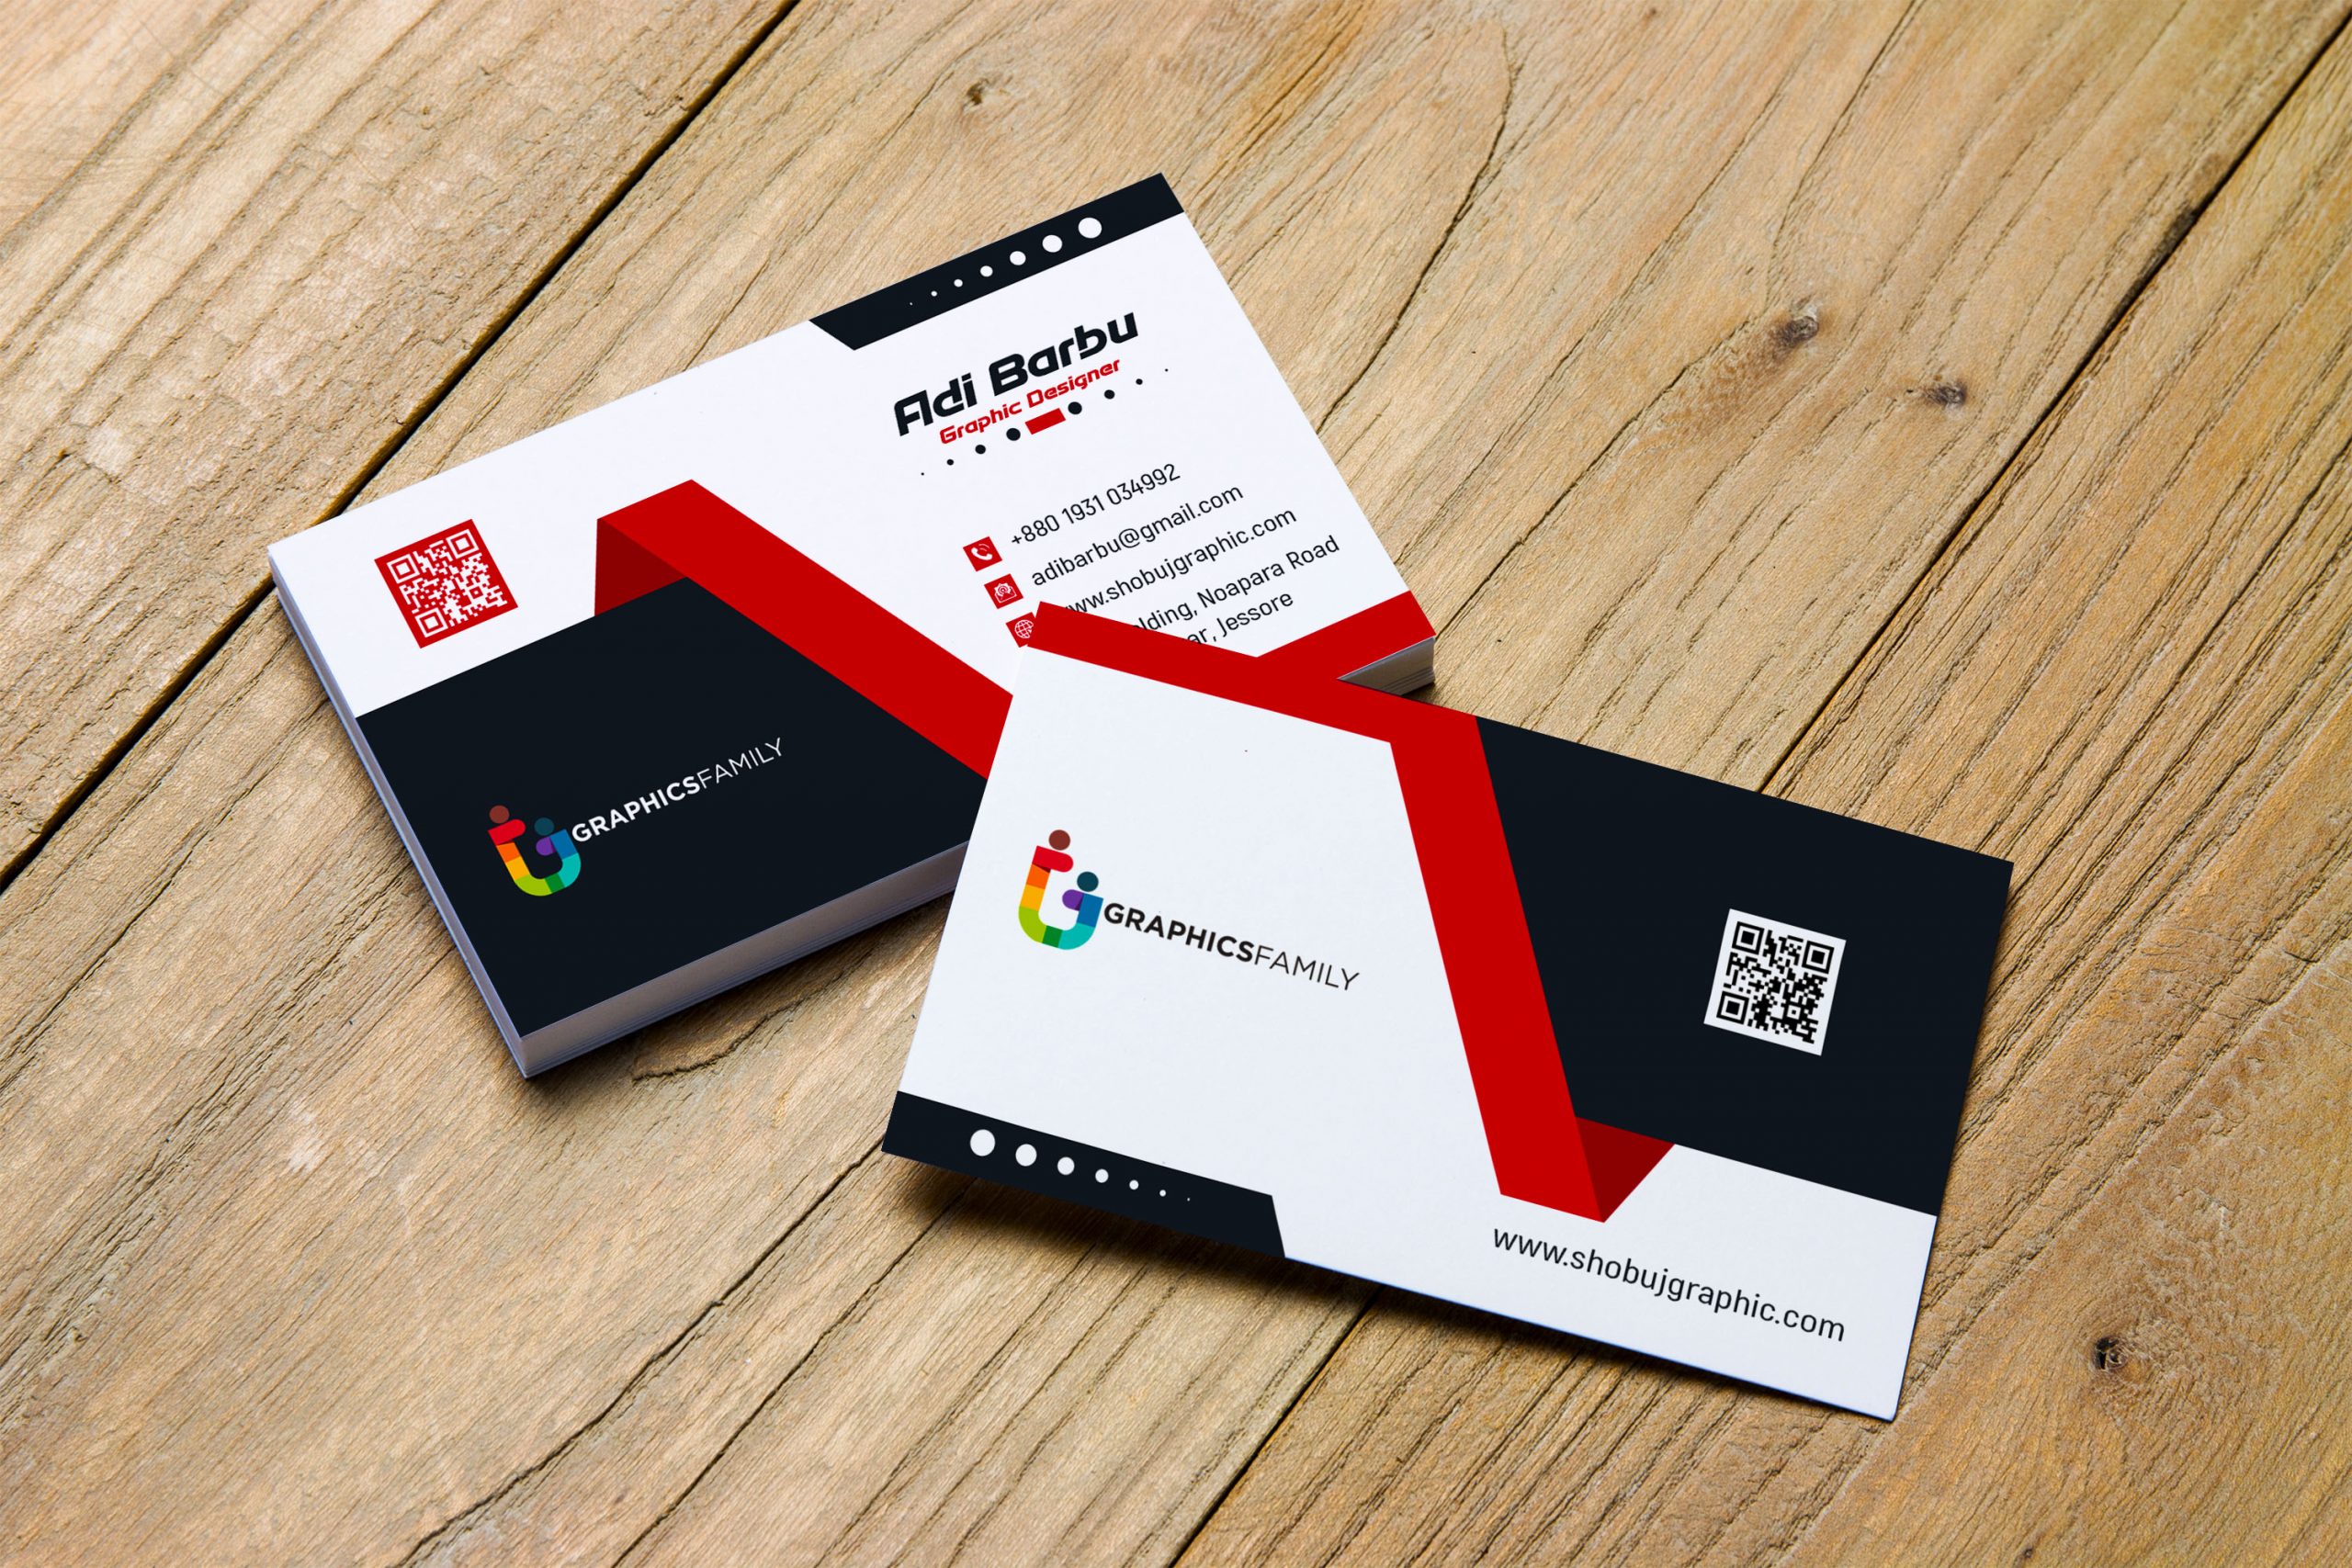 Sample Business Card Templates Free Download Mopaeastern